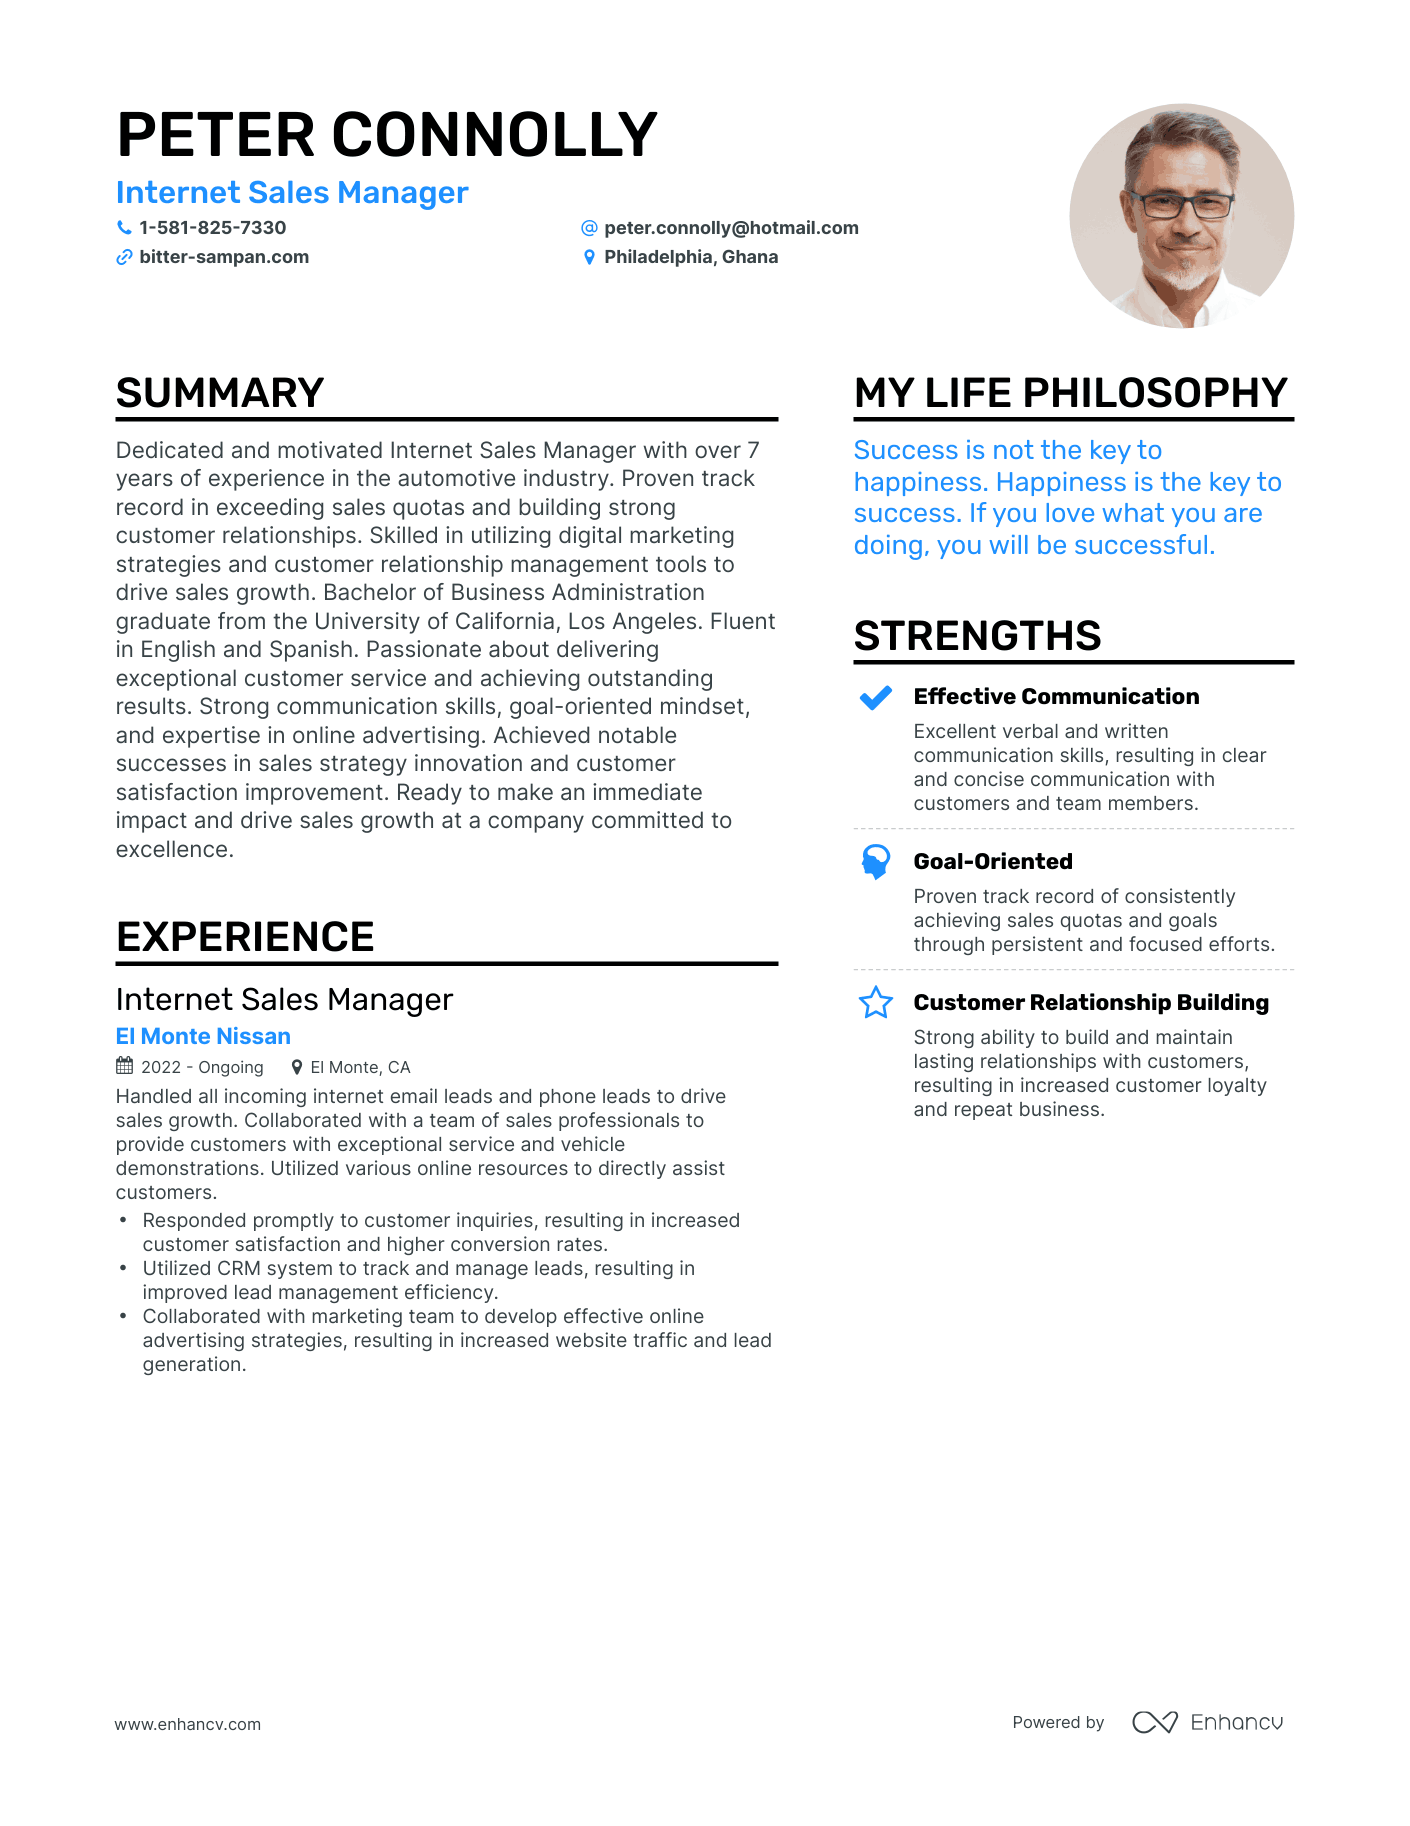 Internet Sales Manager resume example